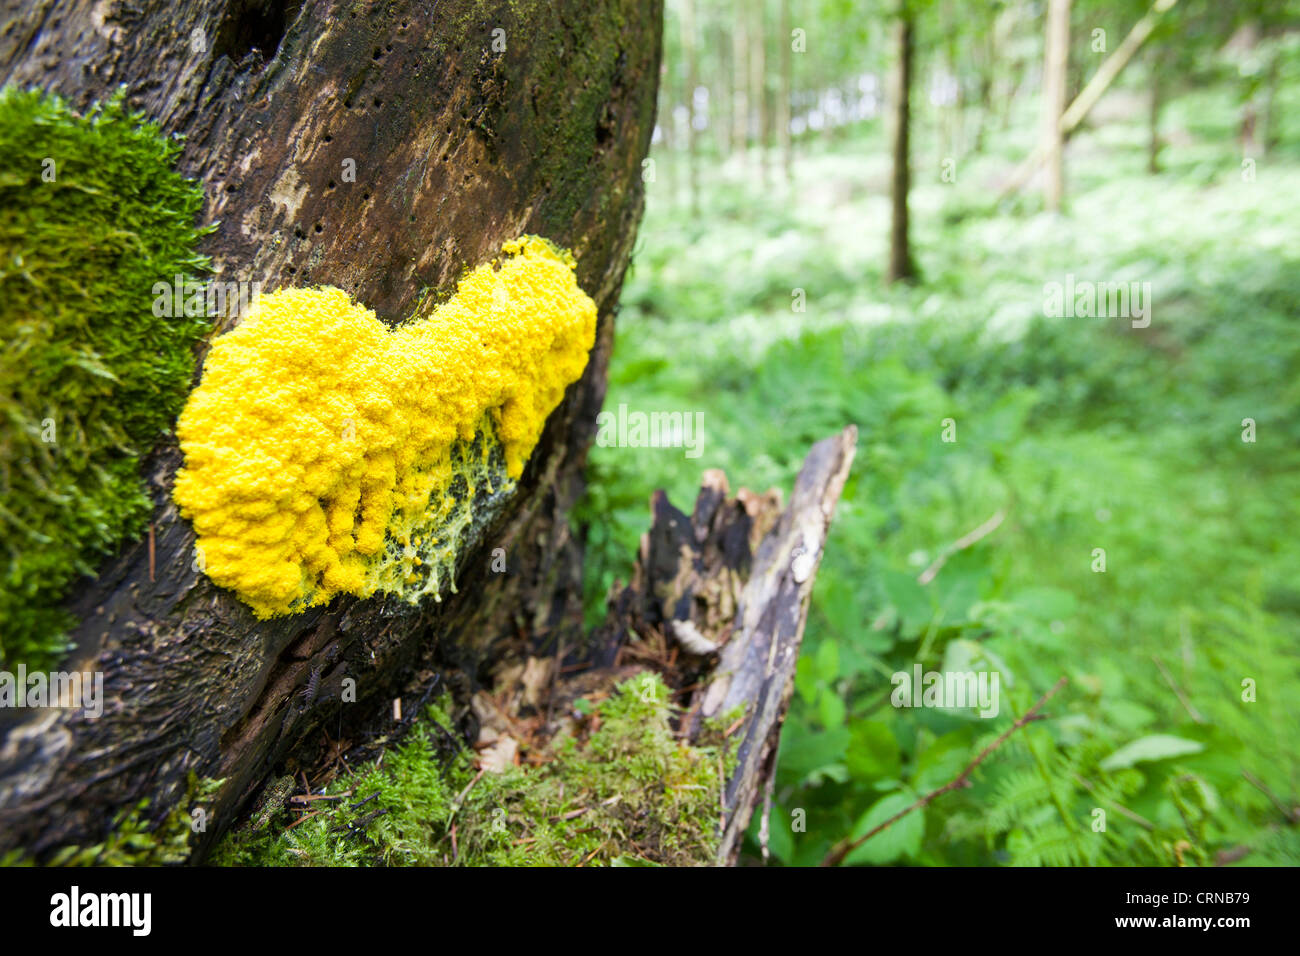 A yellow slimy funghi on a rotting tree stump in Woodland in Dorset, UK Stock Photo